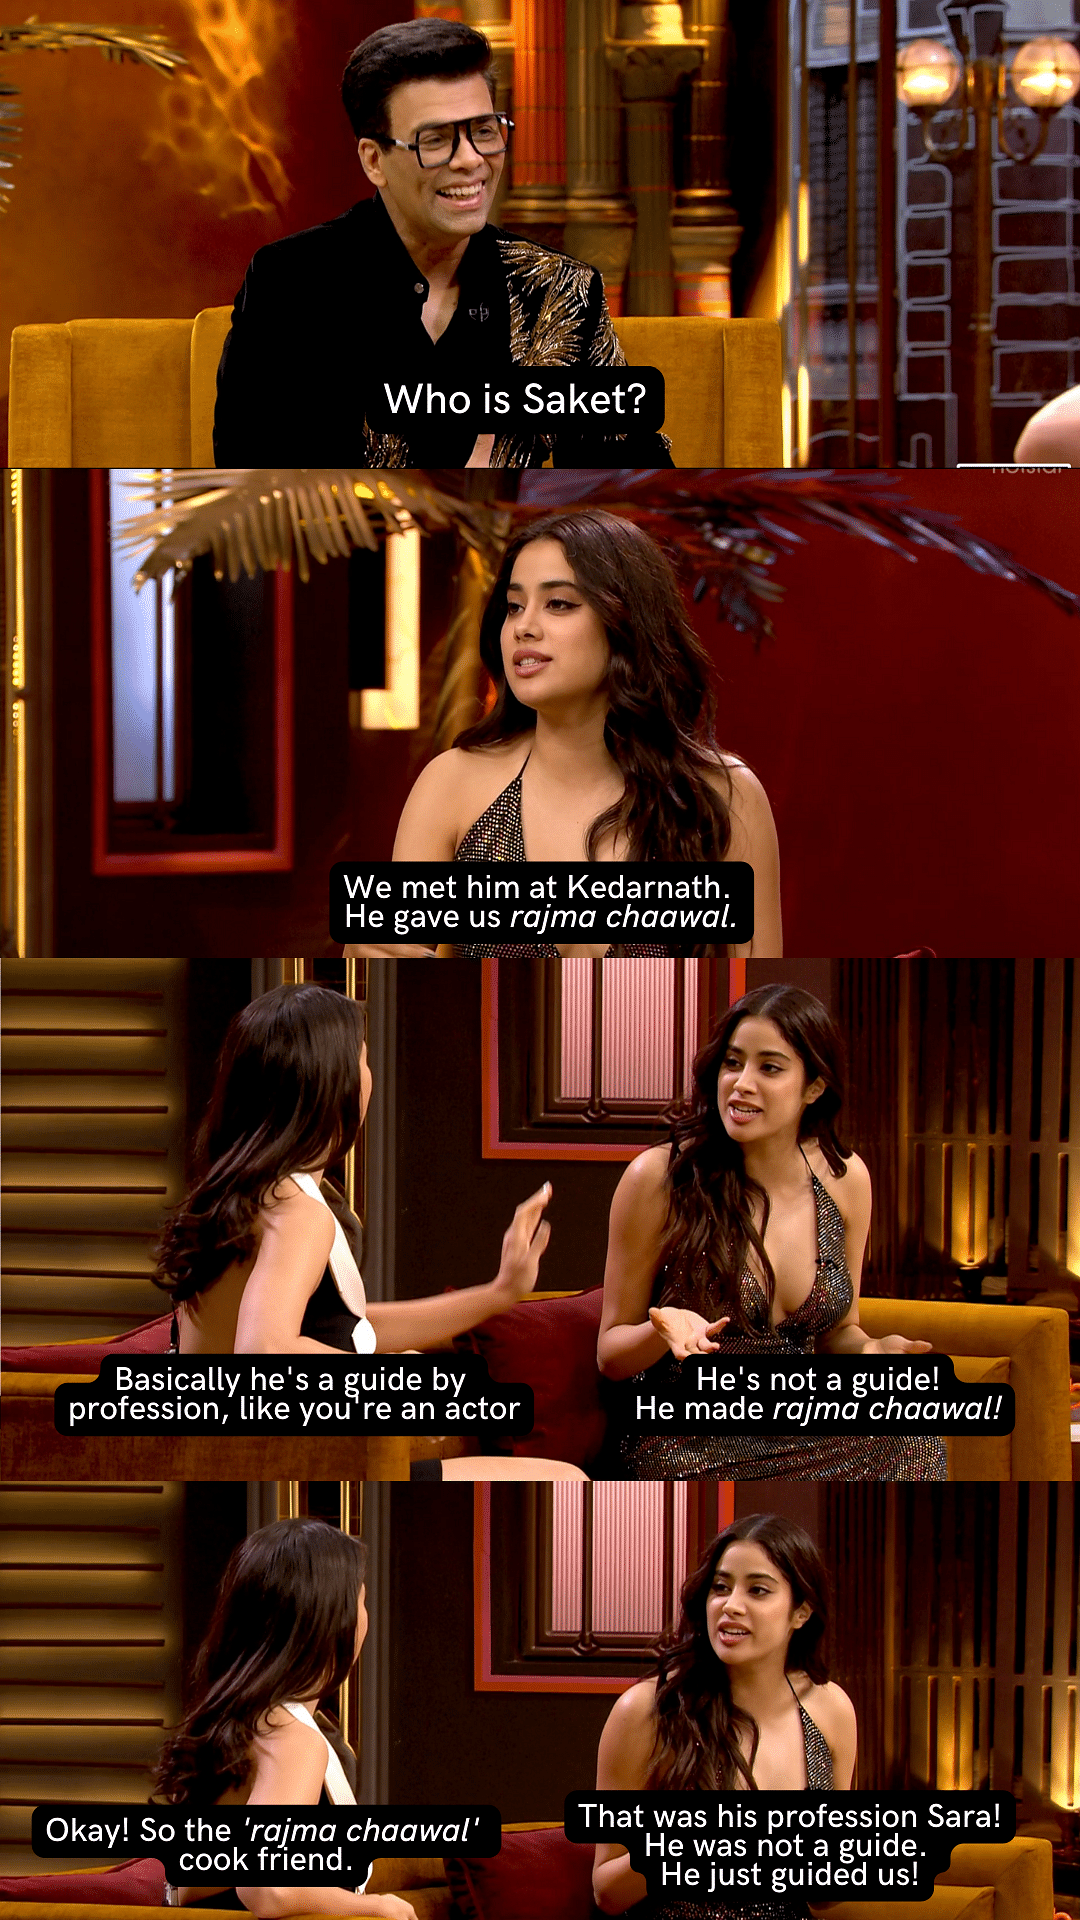 Sara Ali Khan and Janhvi Kapoor's friendship is hilarious and adorable.